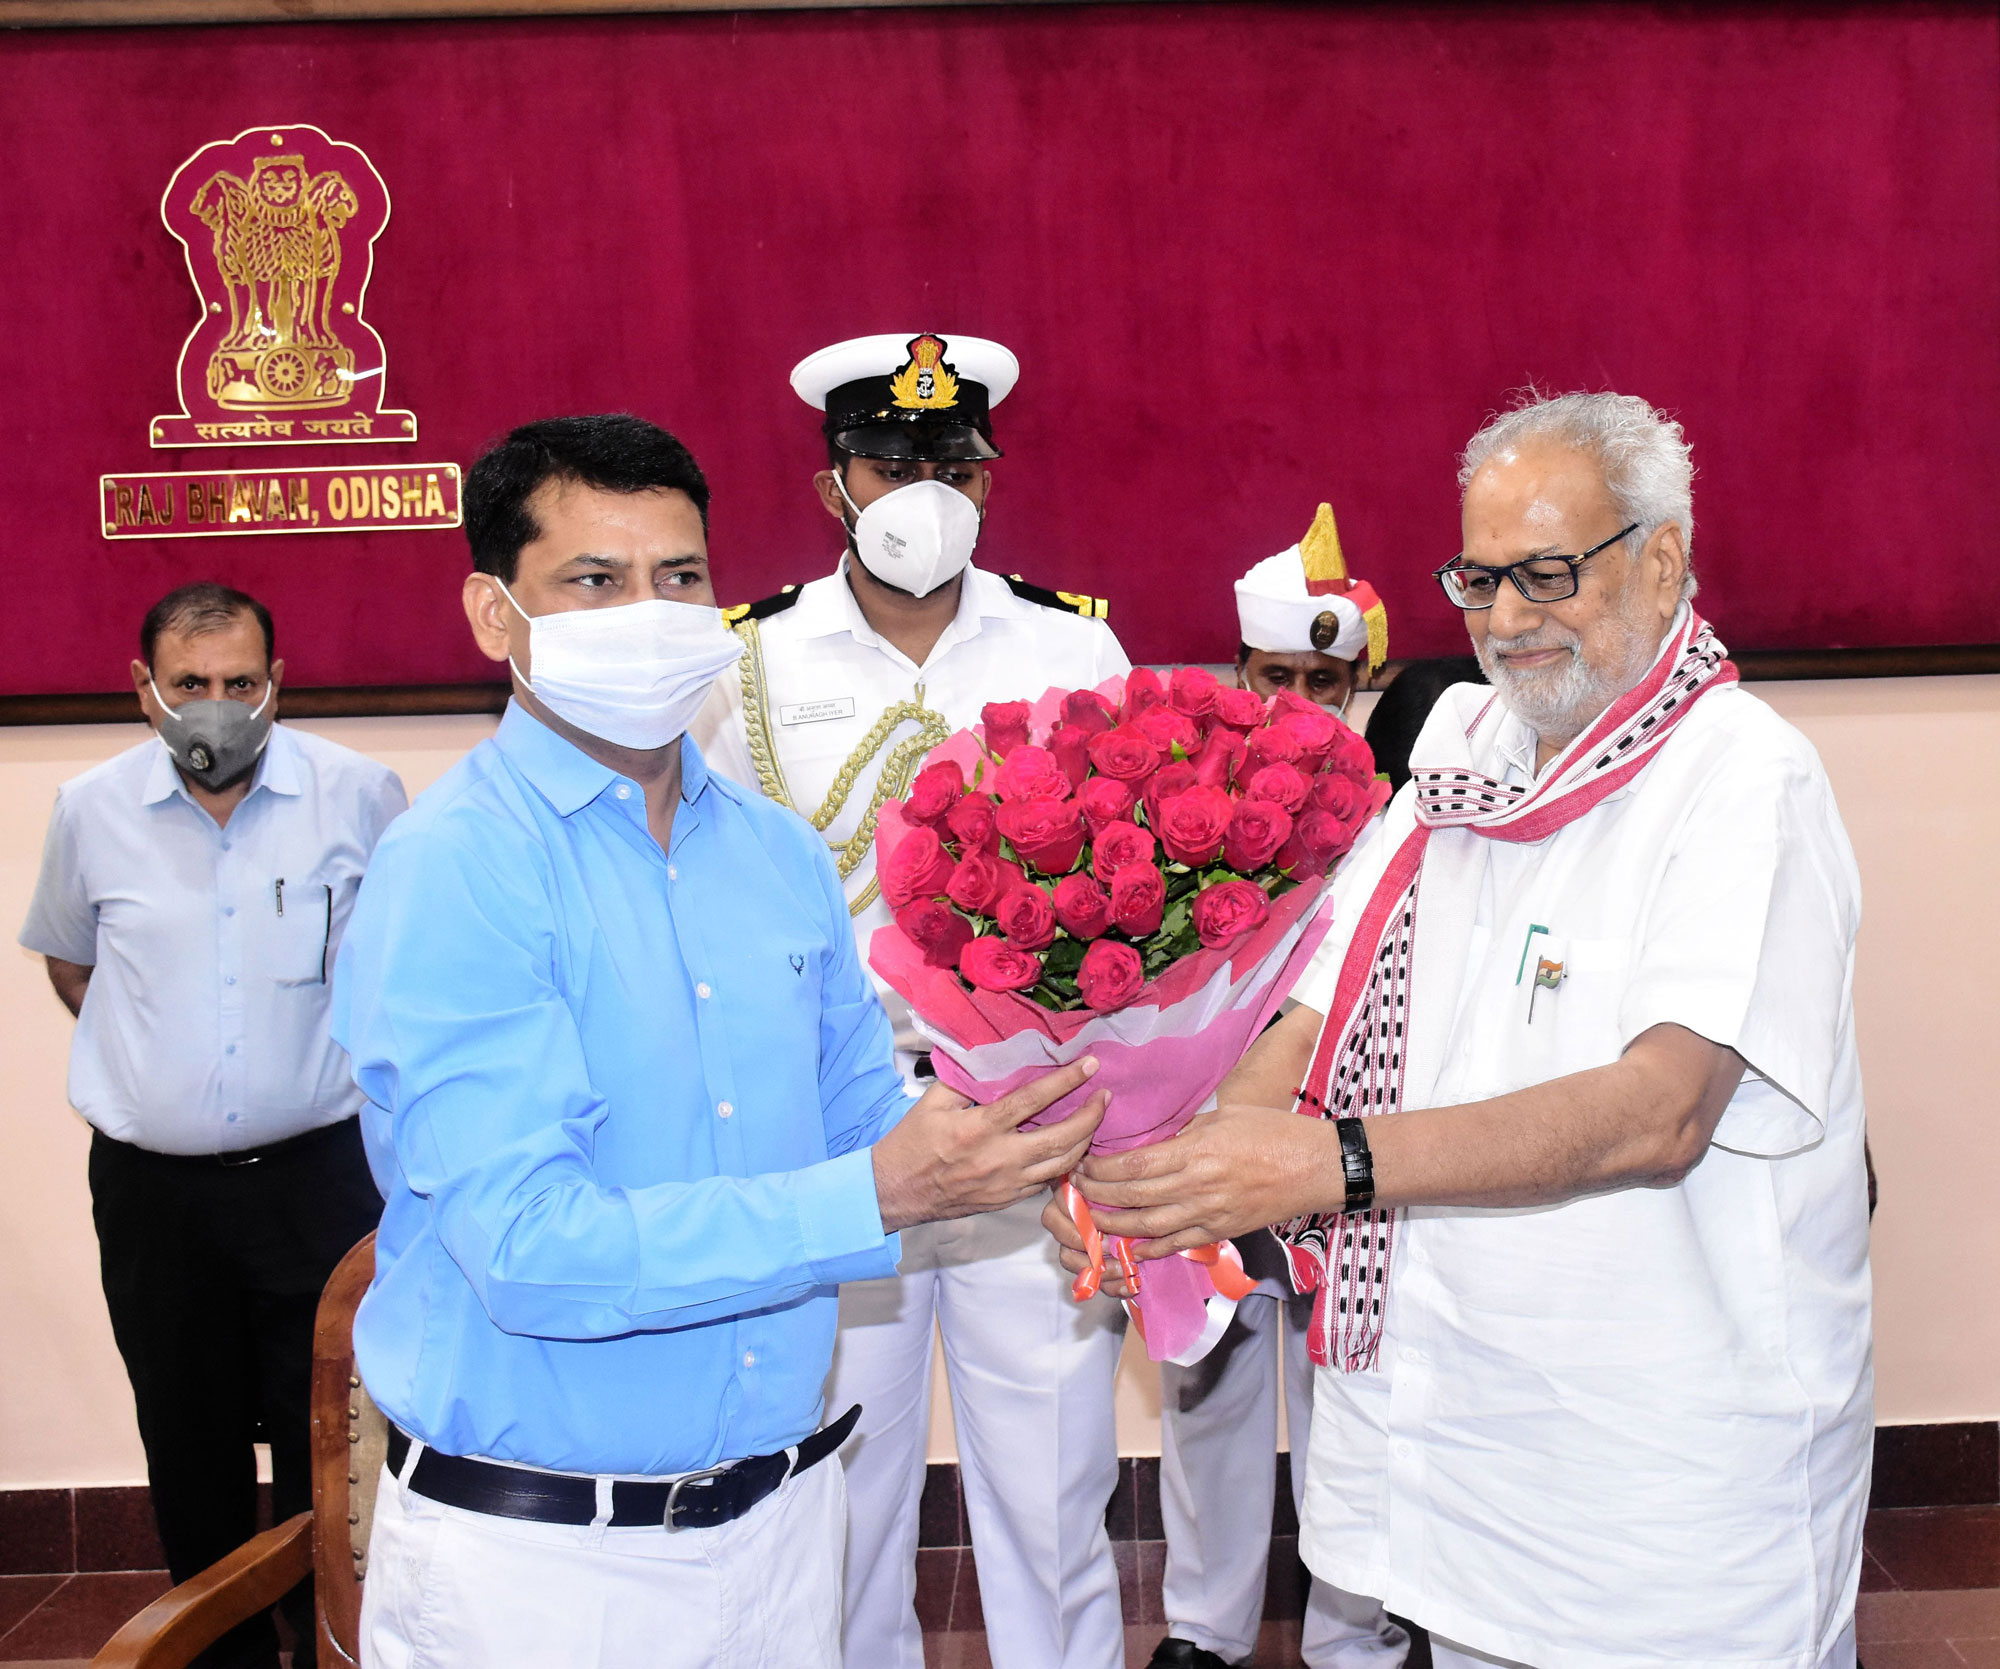 Hon'ble Governor Prof Ganeshi Lal felicitates and presents a memento to outgoing Commissioner-cum-Secretary to Governor Dr Pramod Kumar Meherda at a farewell function in the Abhishek Hall of Raj Bhavan on 02.09.2021